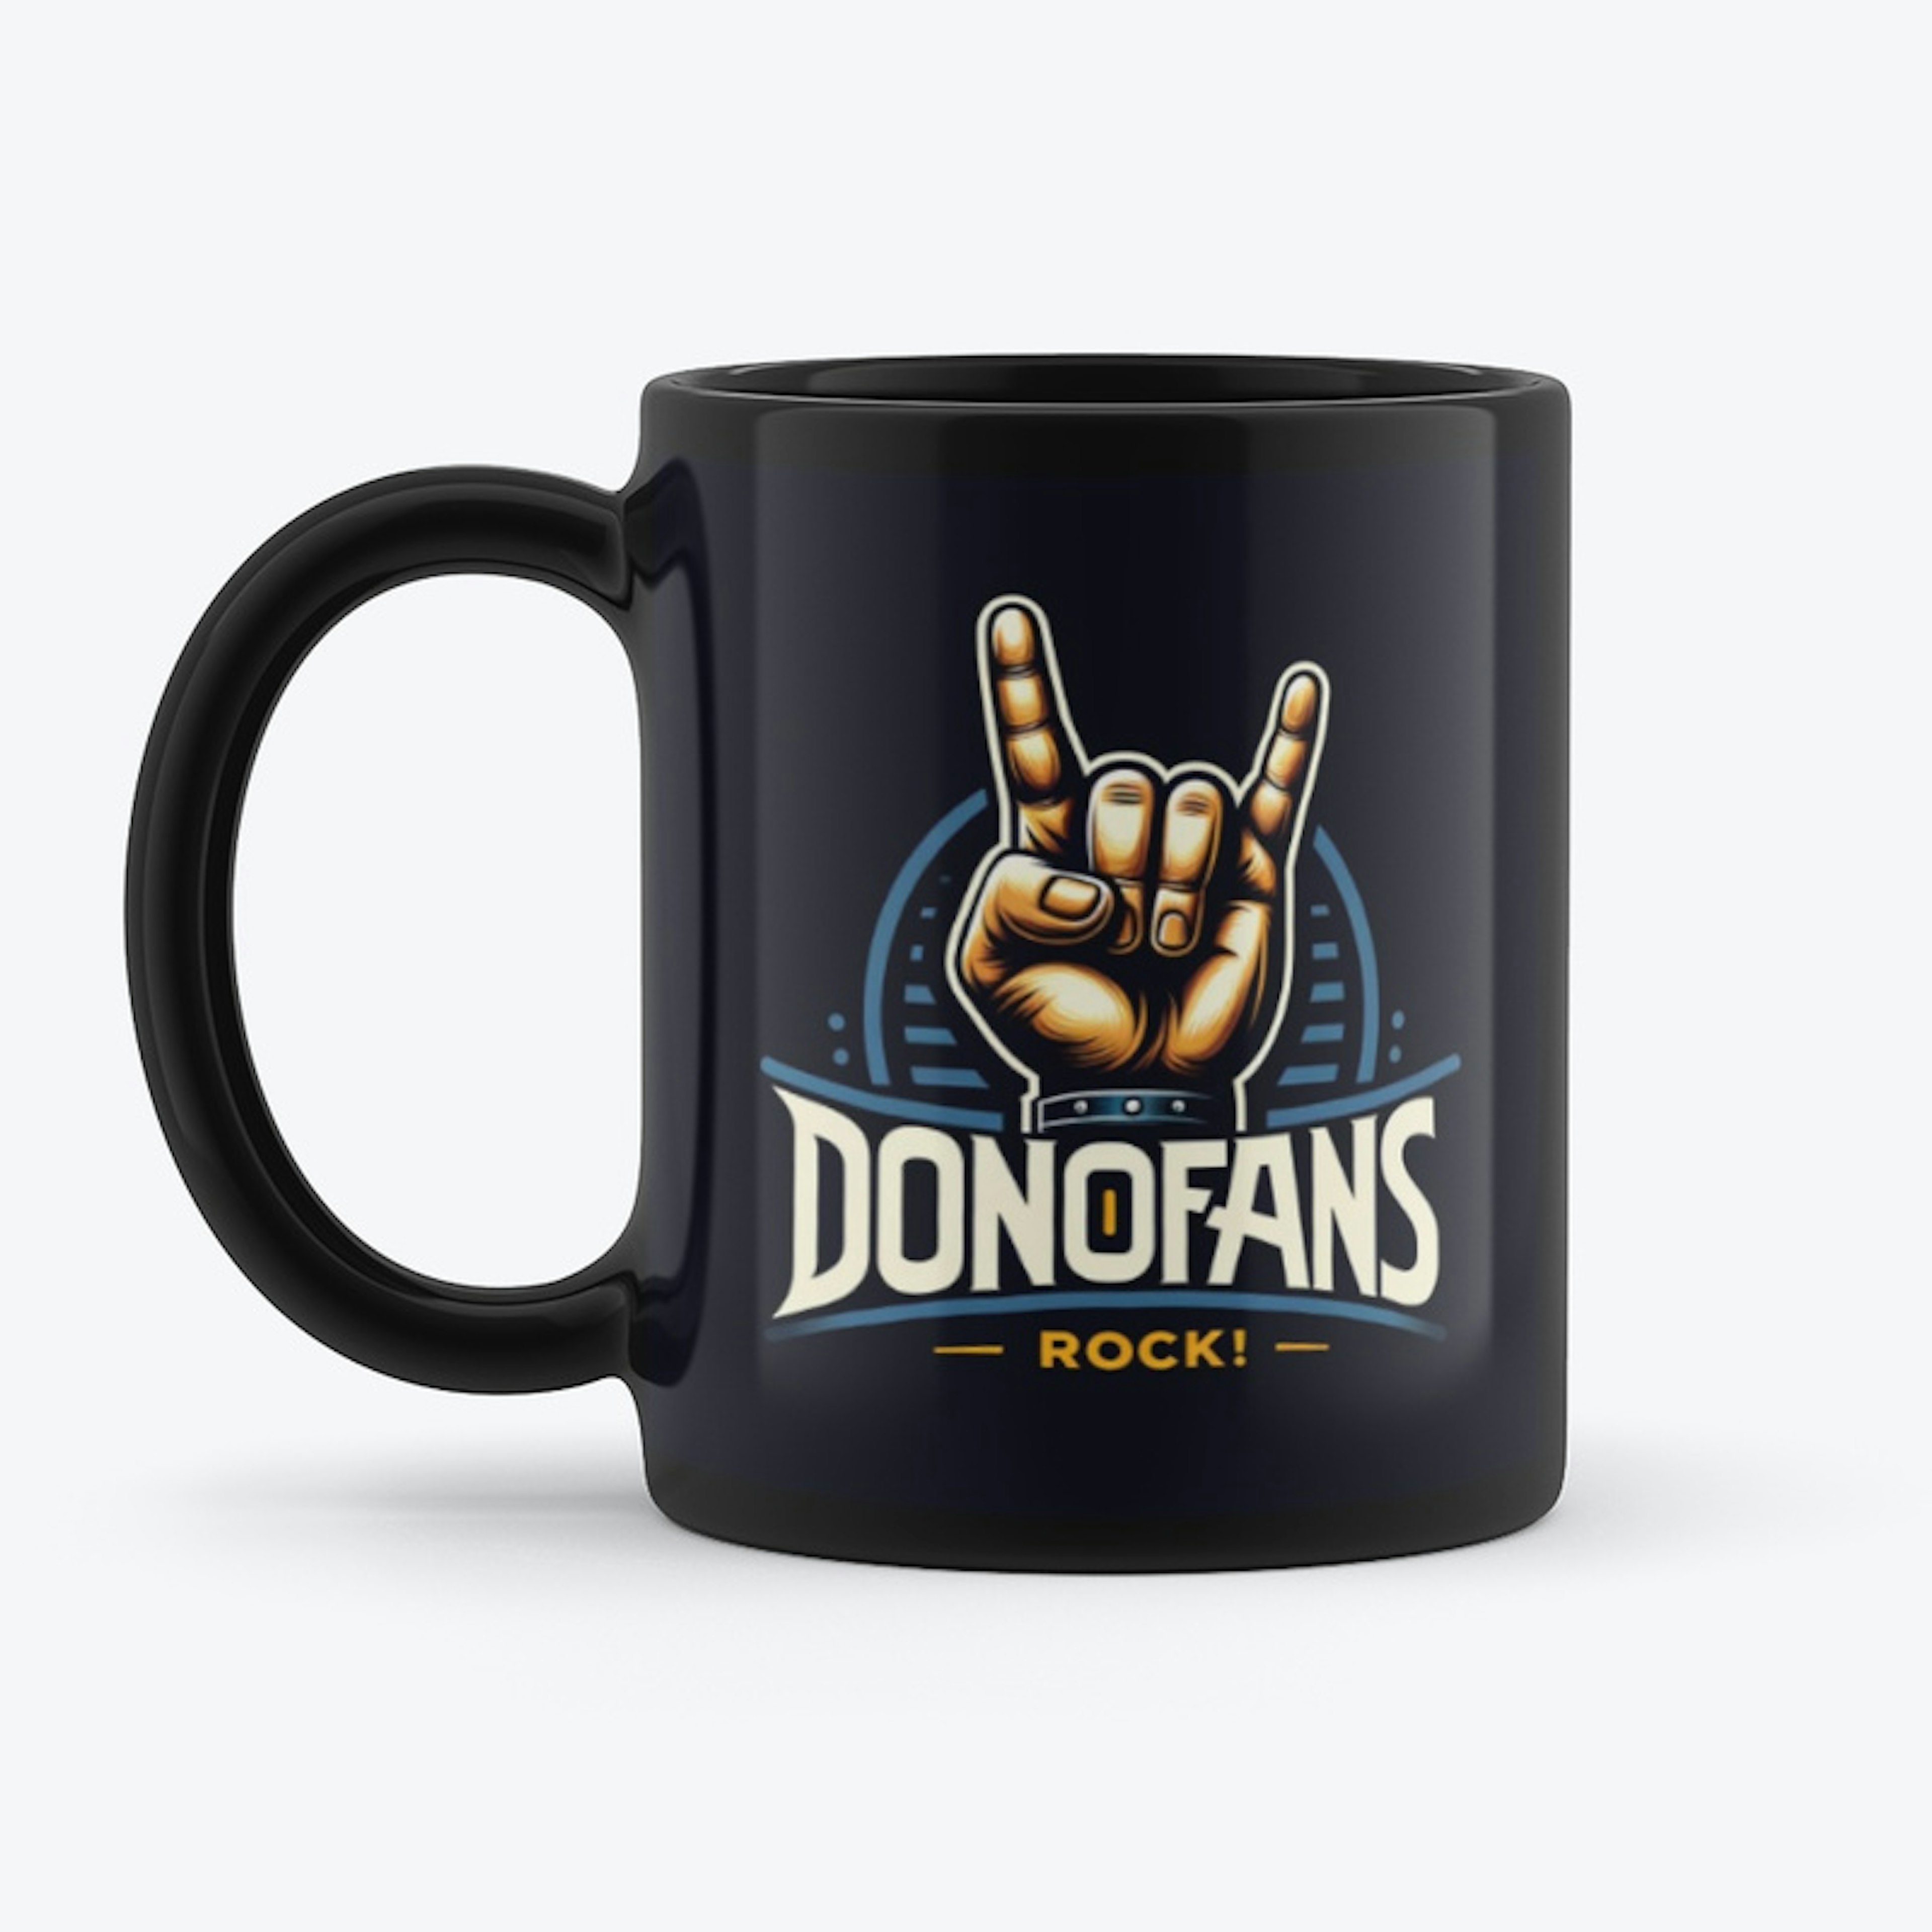 Rock on DonoFans!